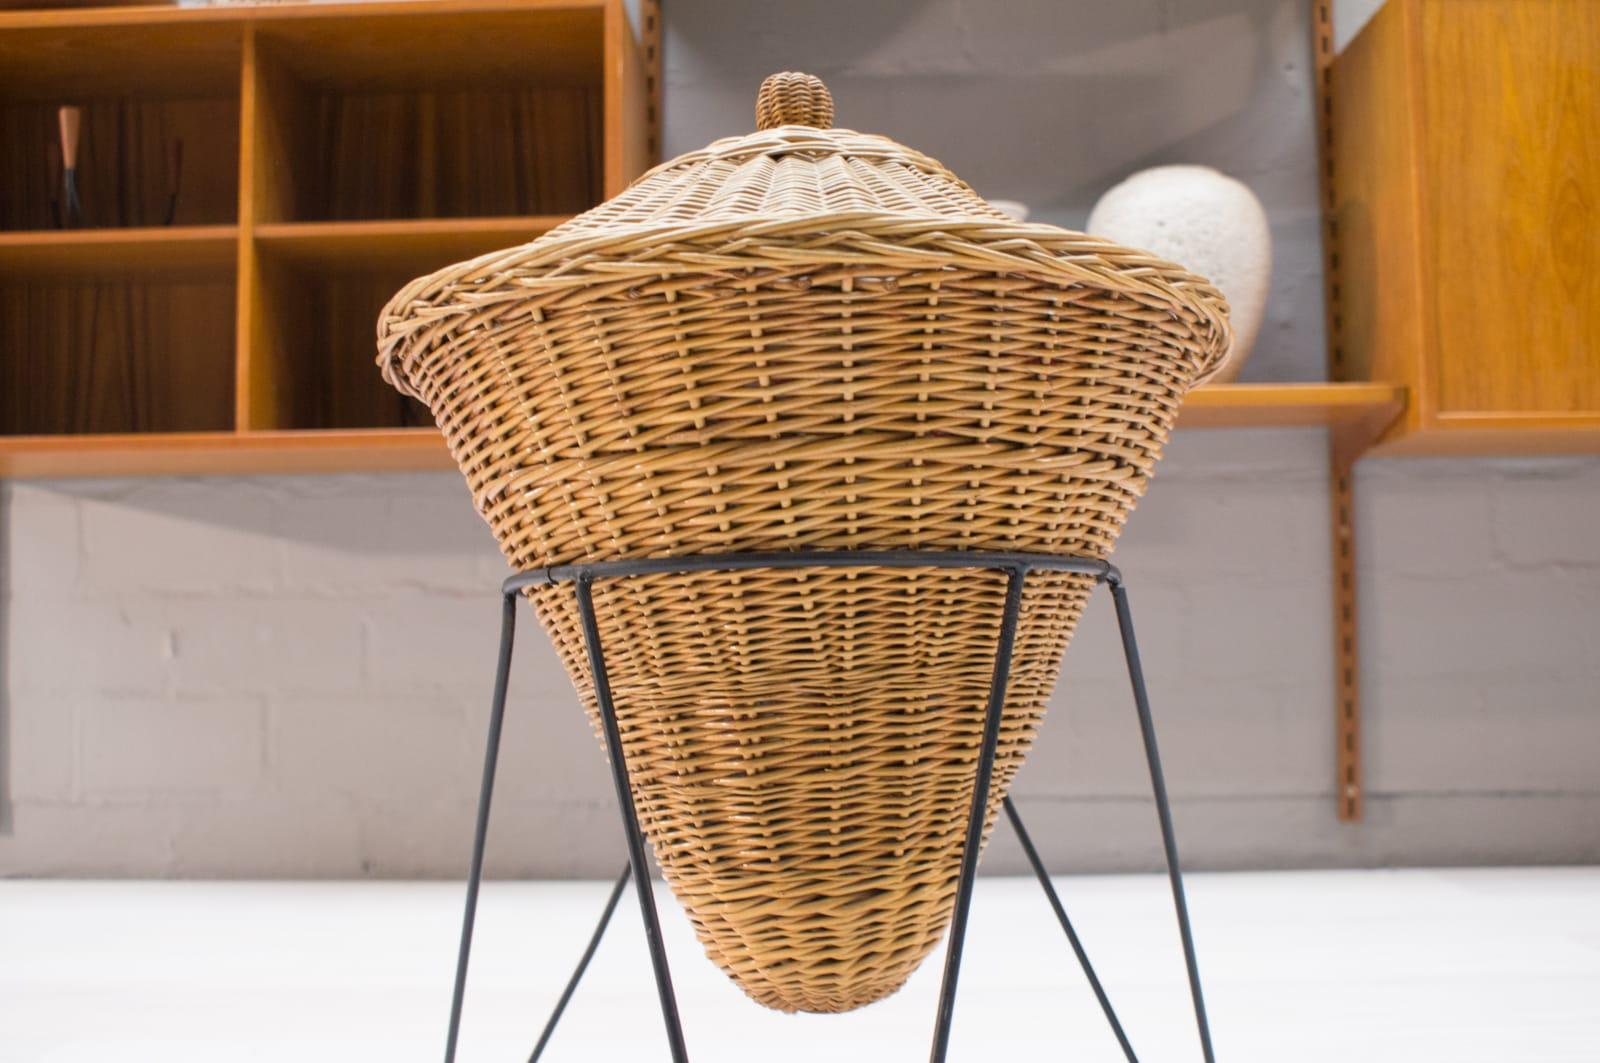 Elegant Mid-Century Modern wicker basket on a metal tripod base. Inside are smaller pockets. Made probably in Italy, 1970s.